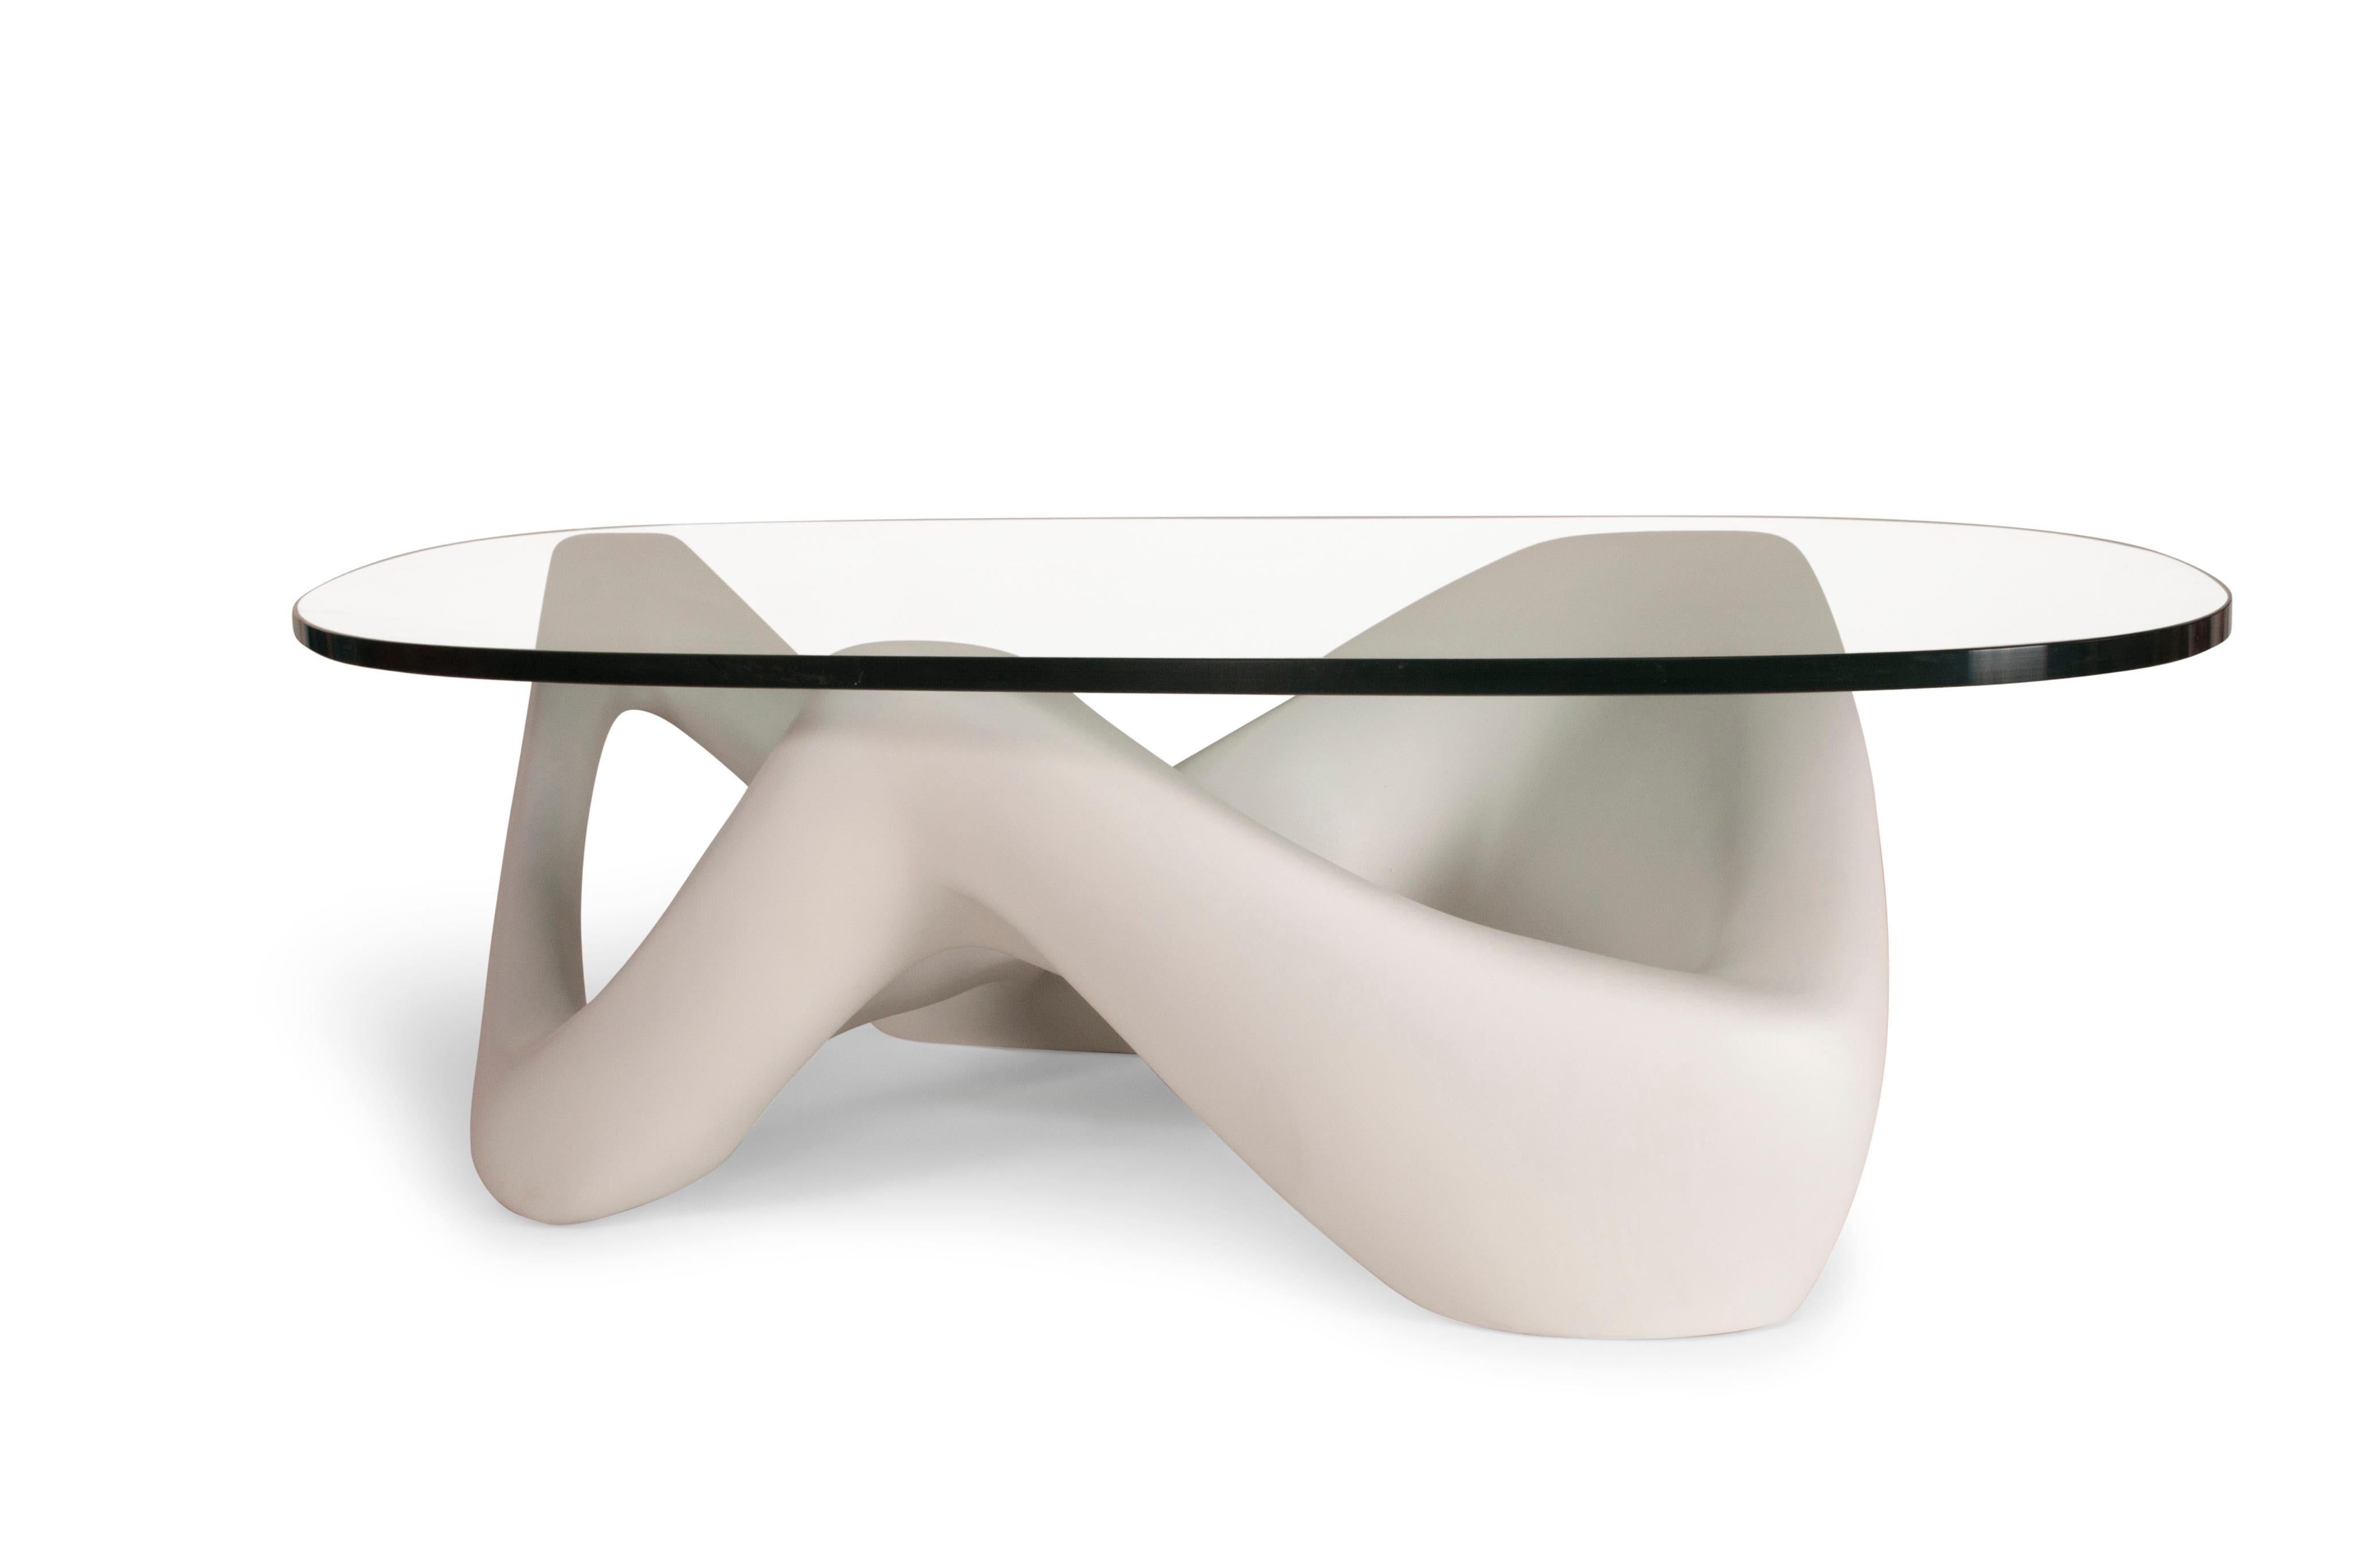 Organic Modern Amorph Net Coffee Table White Lacquered with Organic Shaped Tempered Glass For Sale